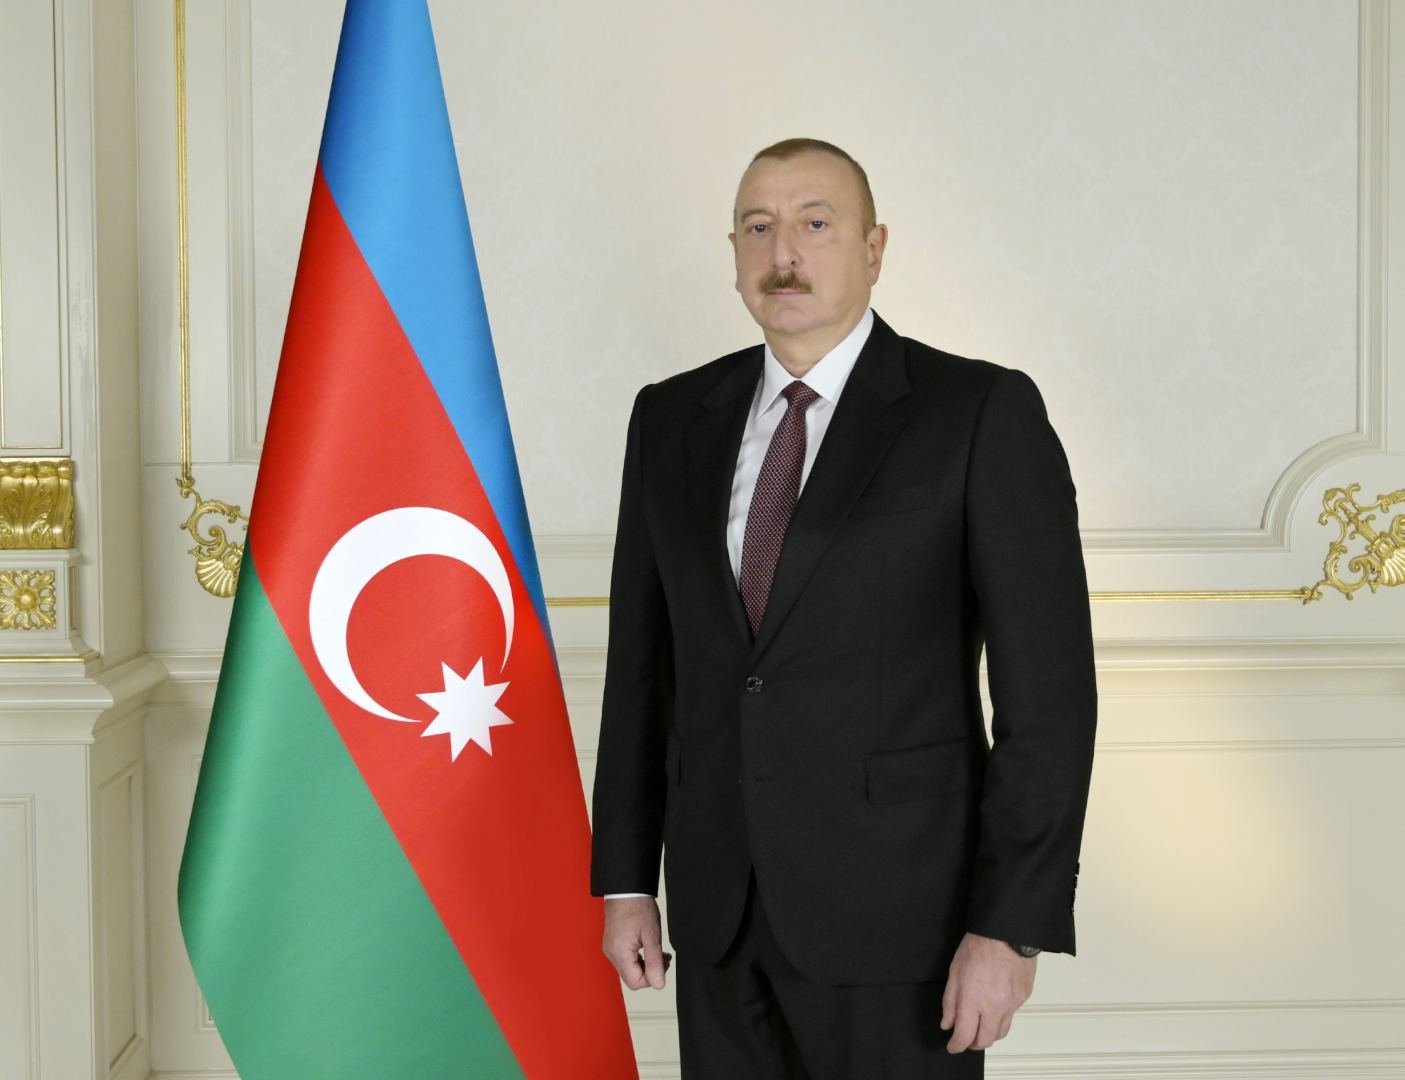 This is our common victory, victory of Azerbaijani people - President Aliyev